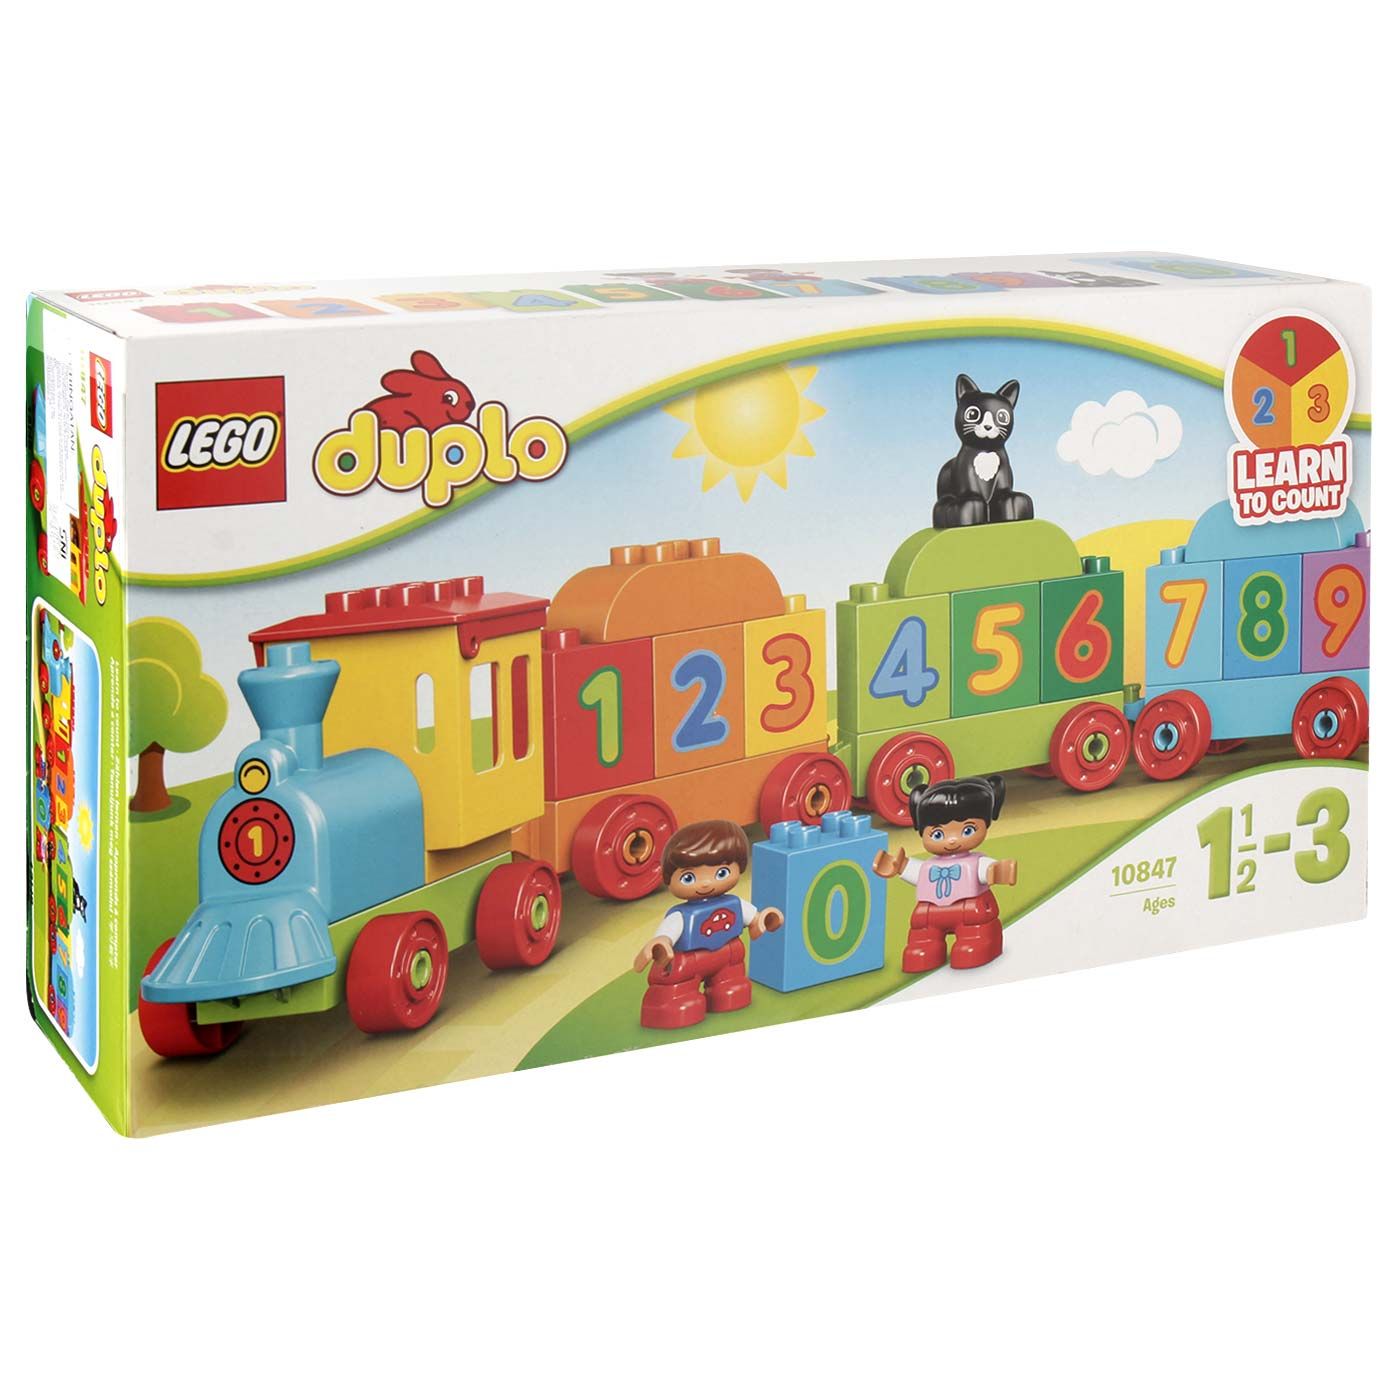 Free Lego Duplo My First Number Train - 2